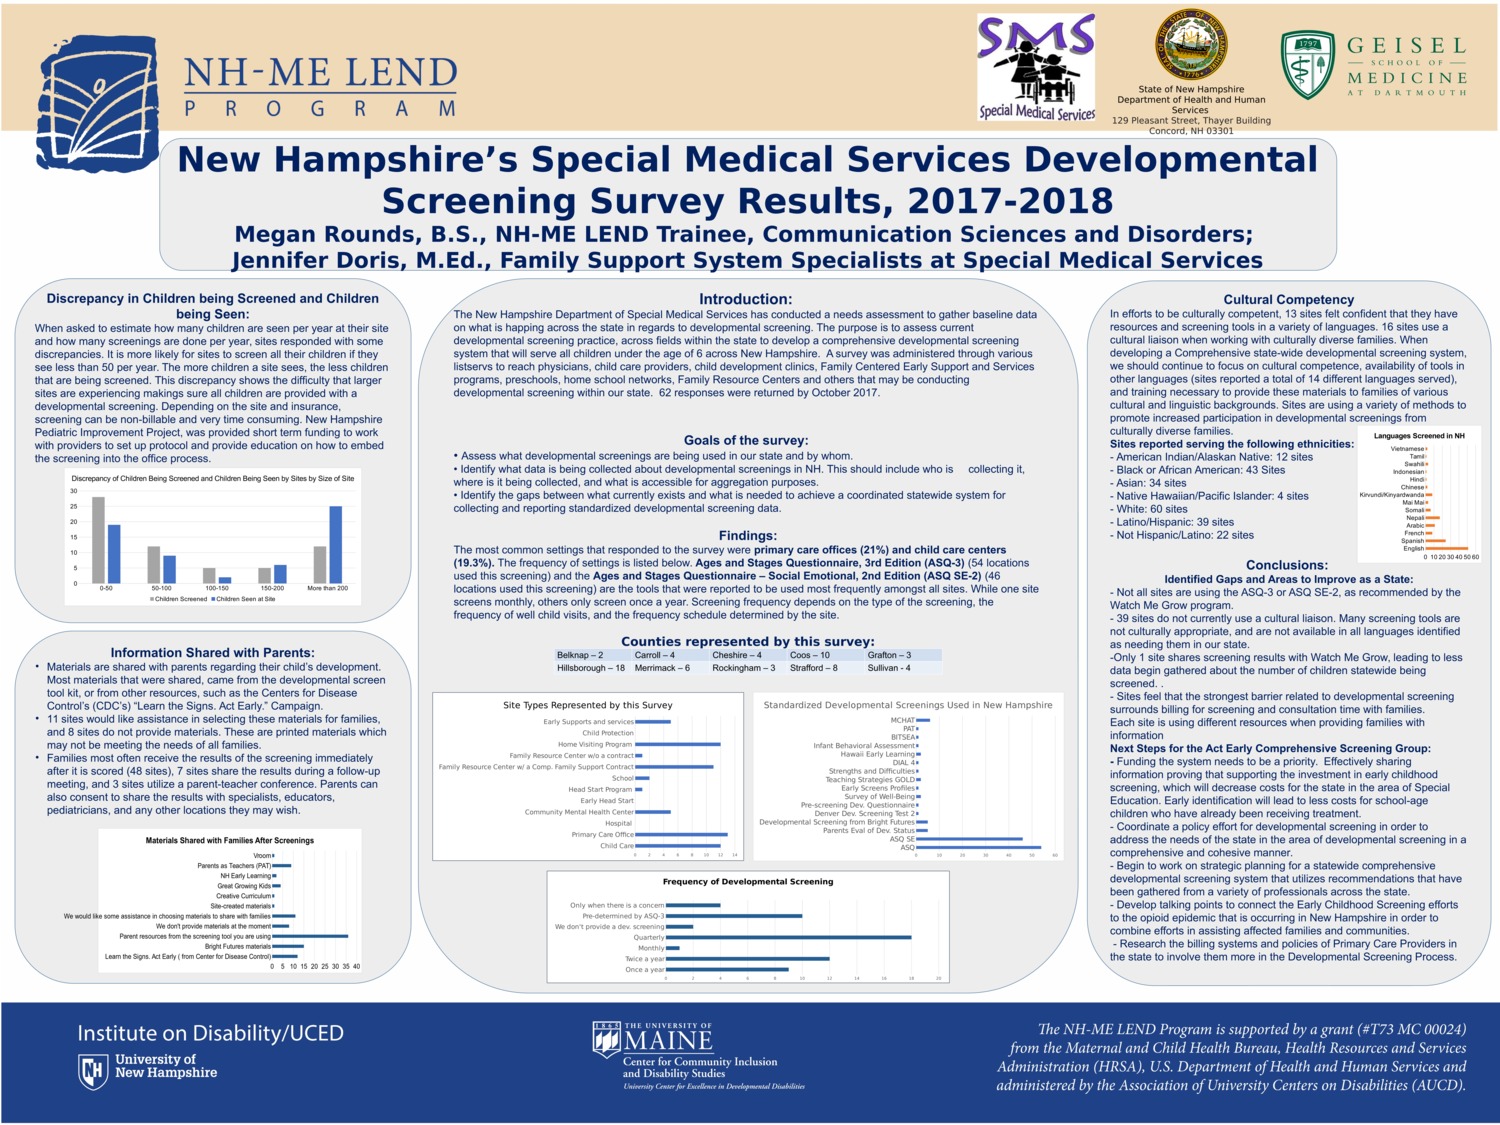 New Hampshire’S Special Medical Services Developmental Screening Survey Results, 2017-2018 by meganrounds